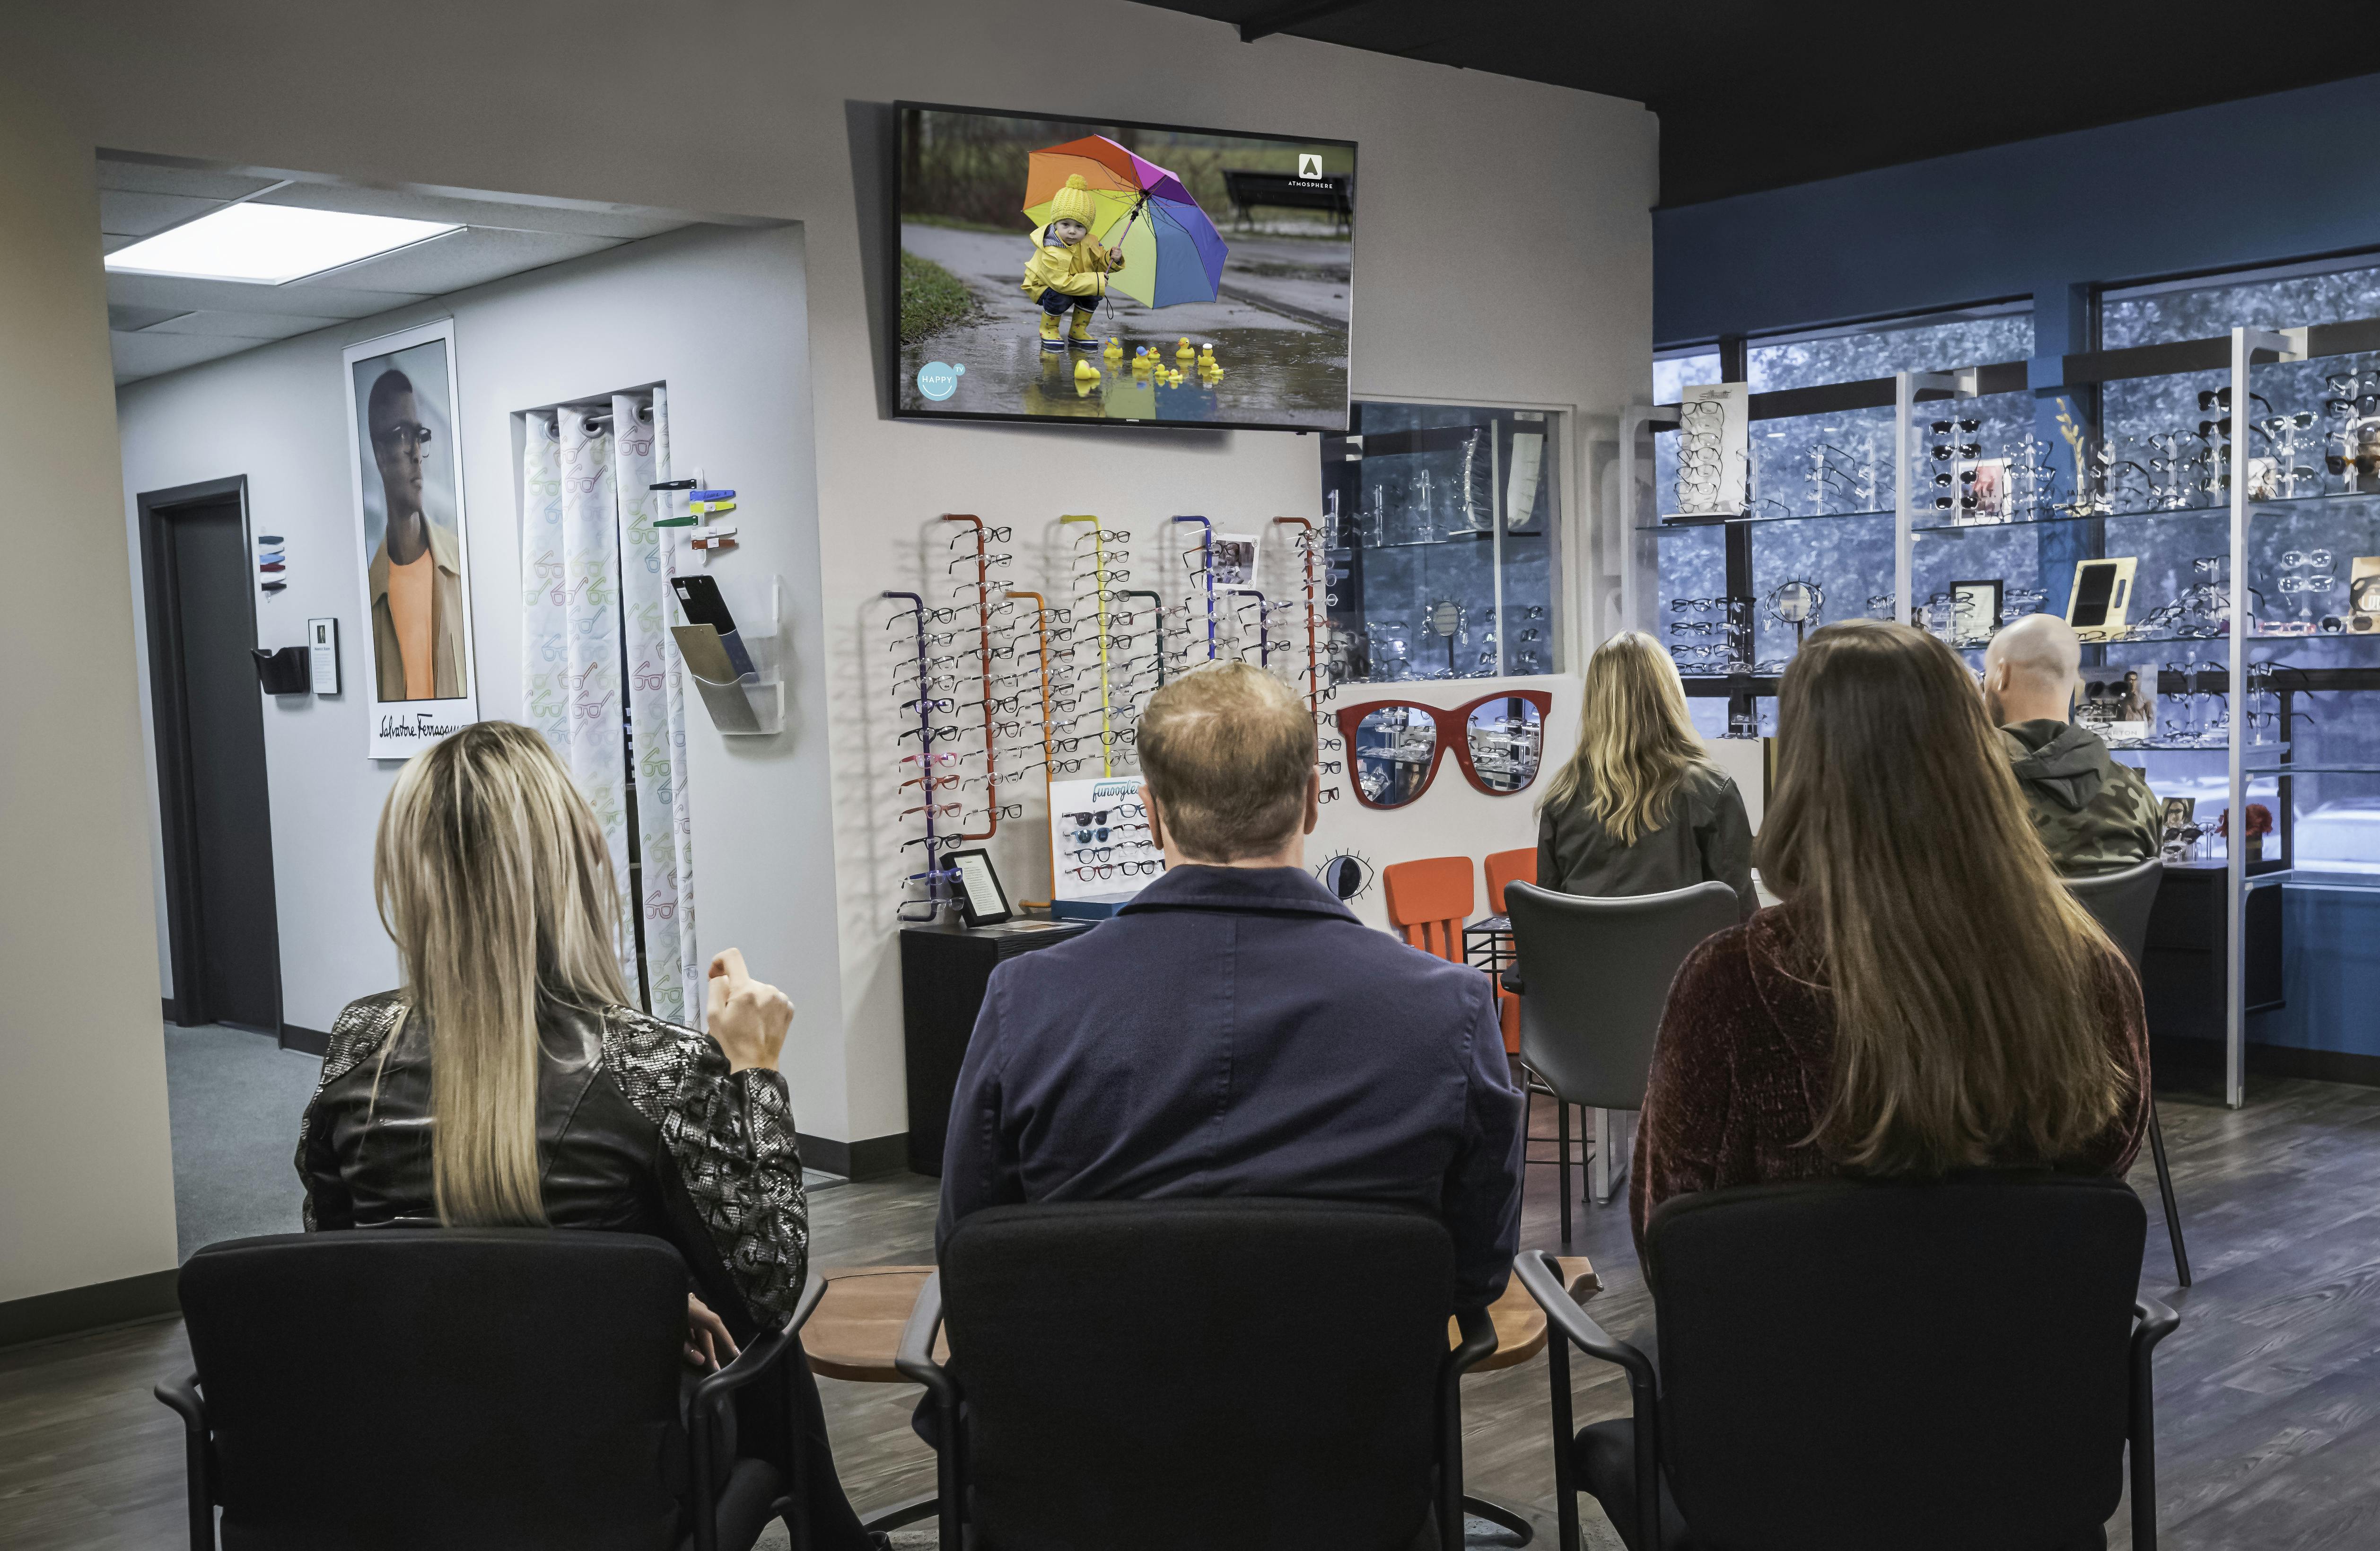 A group of customers watching Atmosphere TV in an eyewear company.